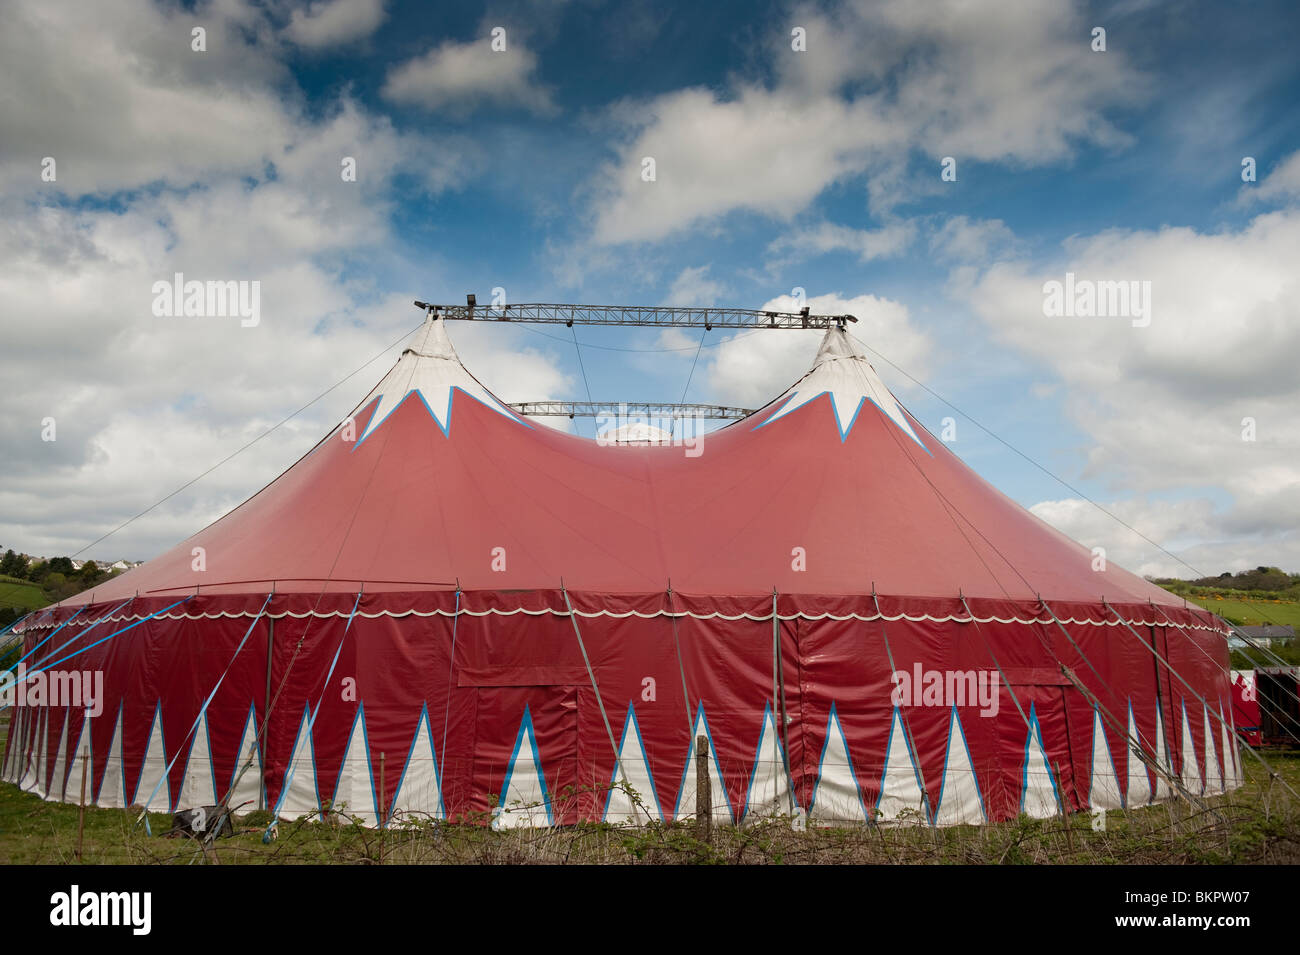 The Big Kid travelling circus red coloured big top tent, visiting Aberystwyth Wales UK Stock Photo